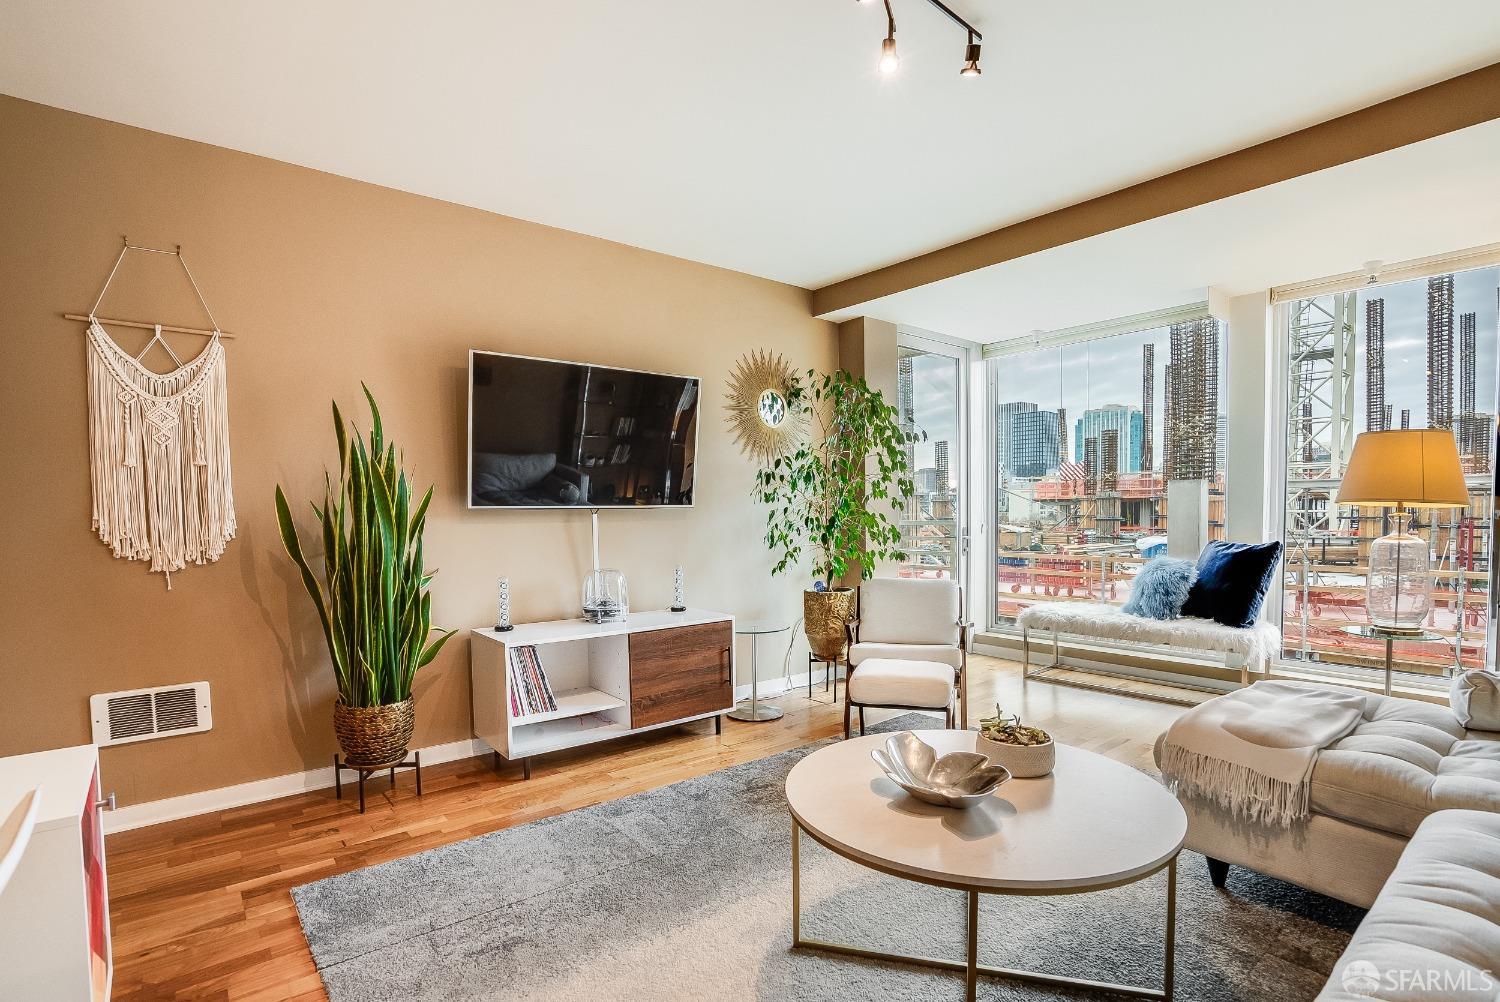 555 4th Street Unit 635, San Francisco, California, 94107, United States, 1 Bedroom Bedrooms, ,1 BathroomBathrooms,Residential,For Sale,555 4th Street Unit 635,1488389